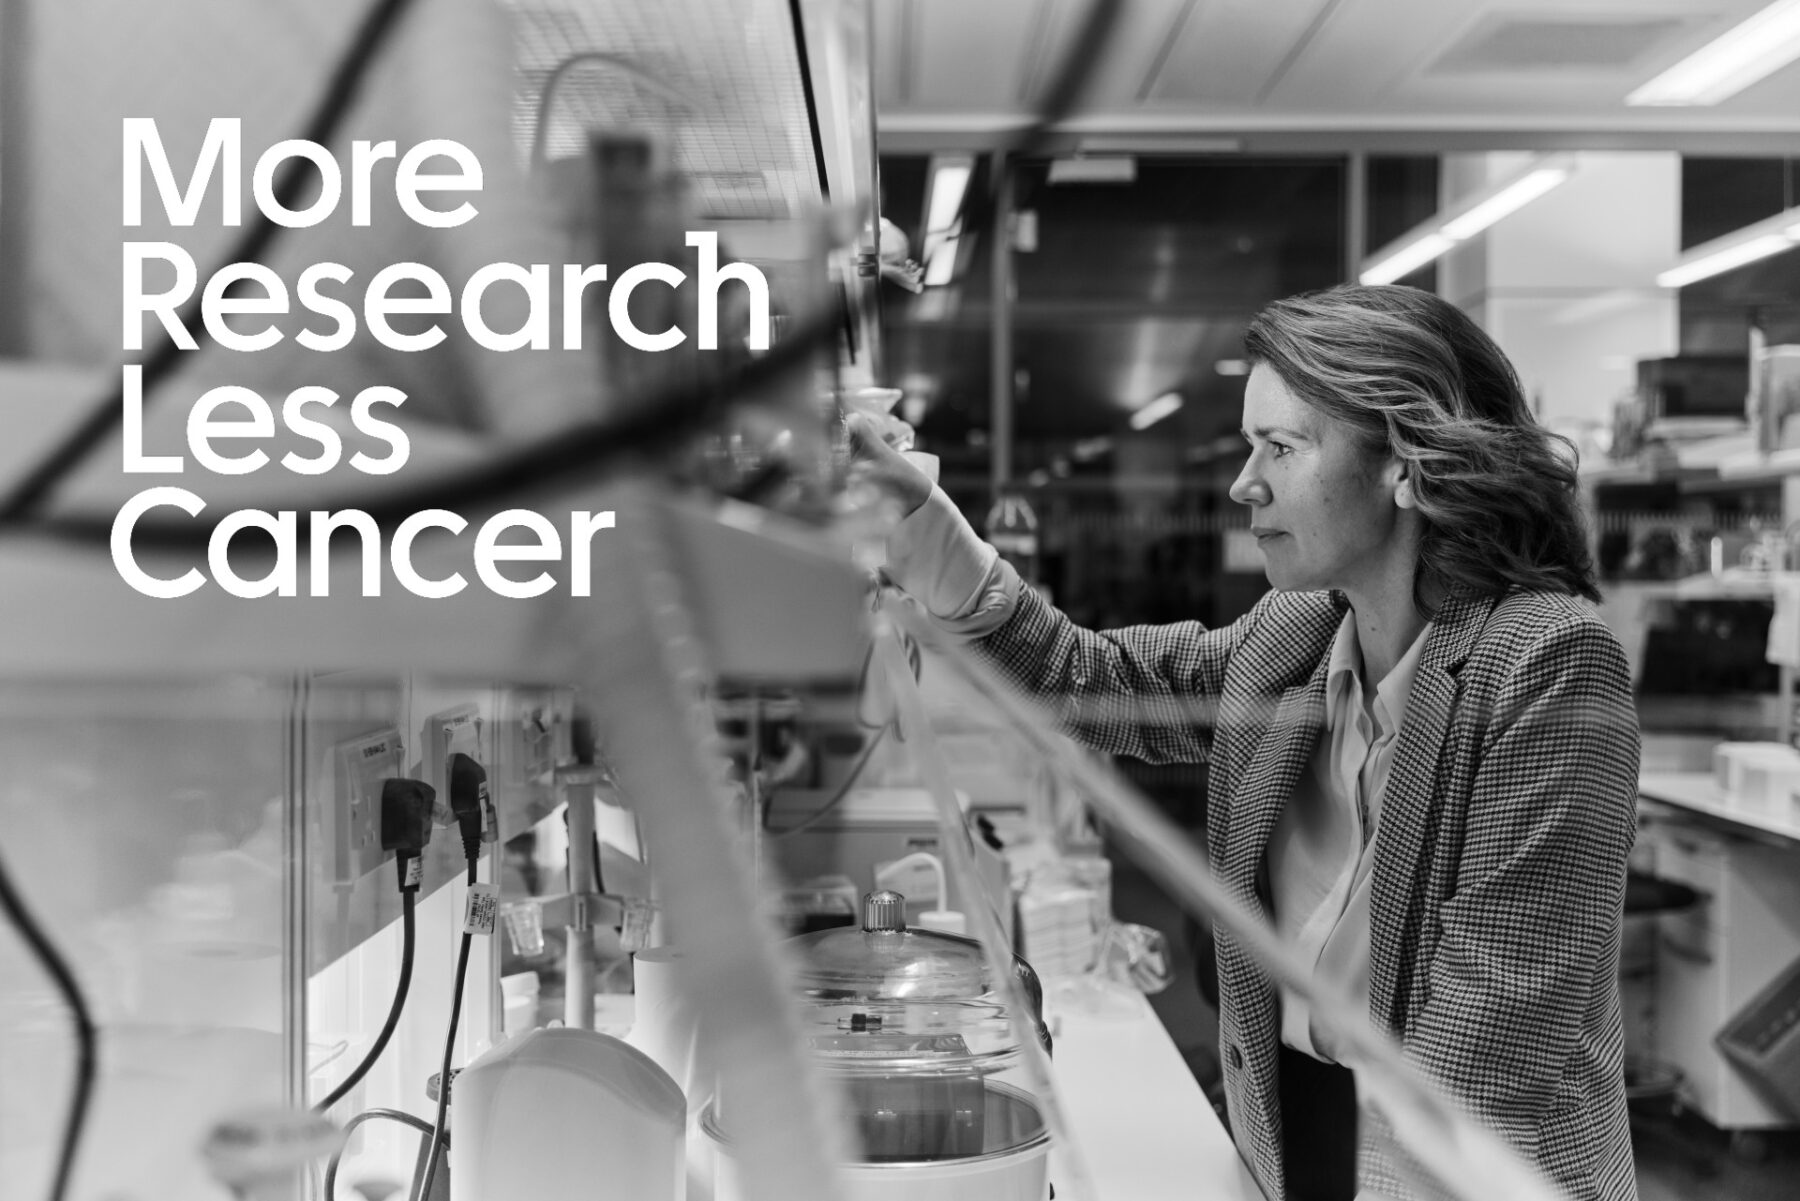 More Research, Less Cancer over an image of a researcher